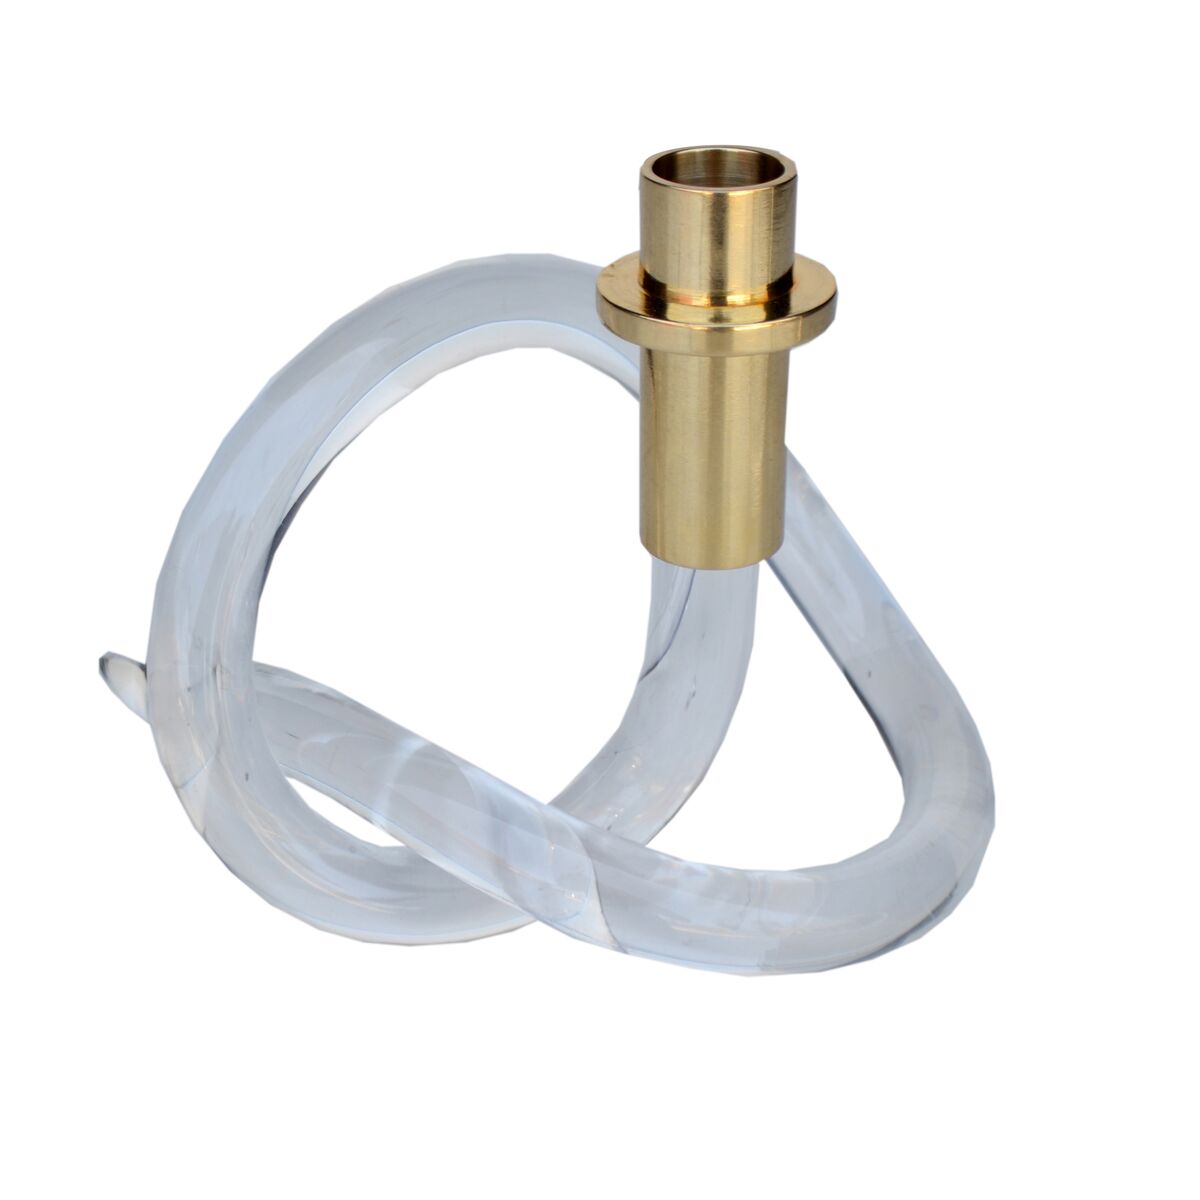 Ce-04c Warp Clear Candle Holder, Clear & Brass